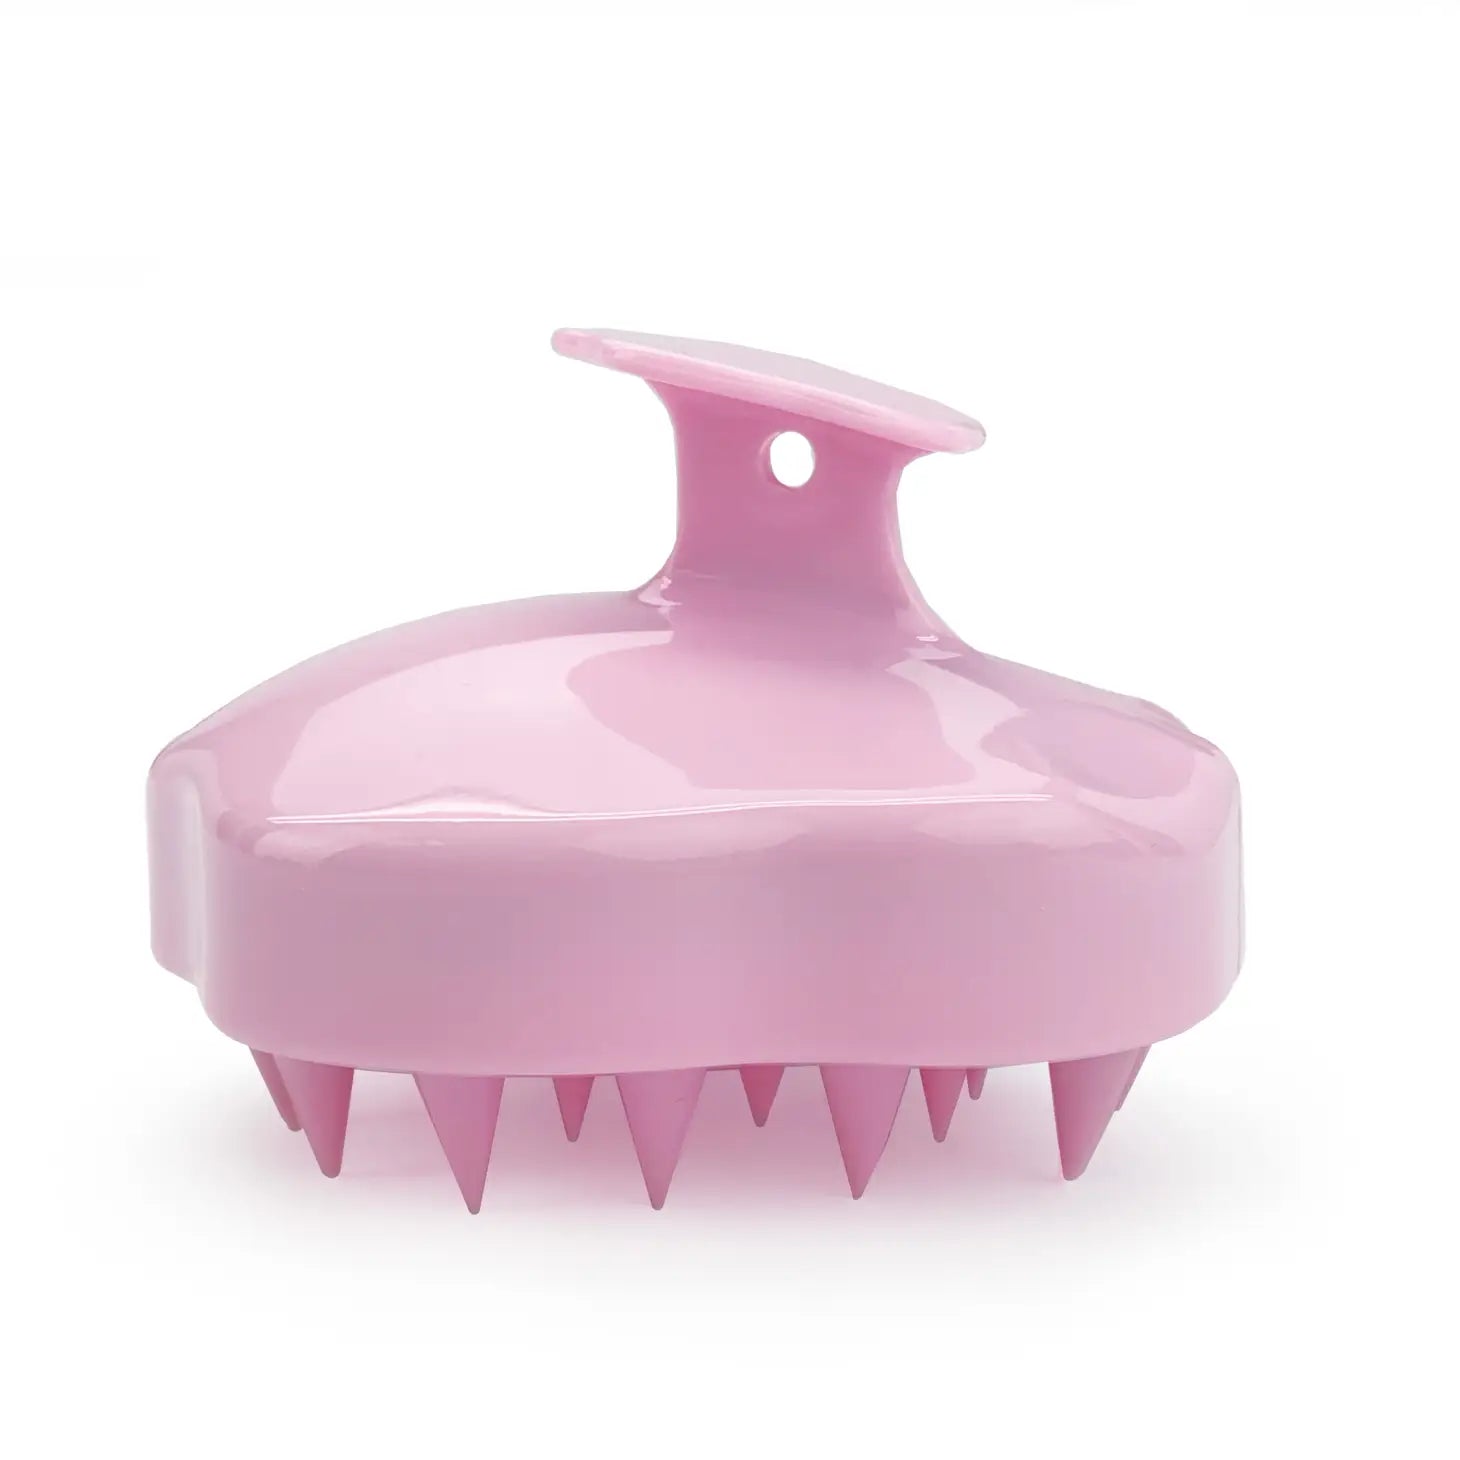 Wide-tooth design for all hair types Use on its own or in the shower Erase tension & deep clean roots pink color